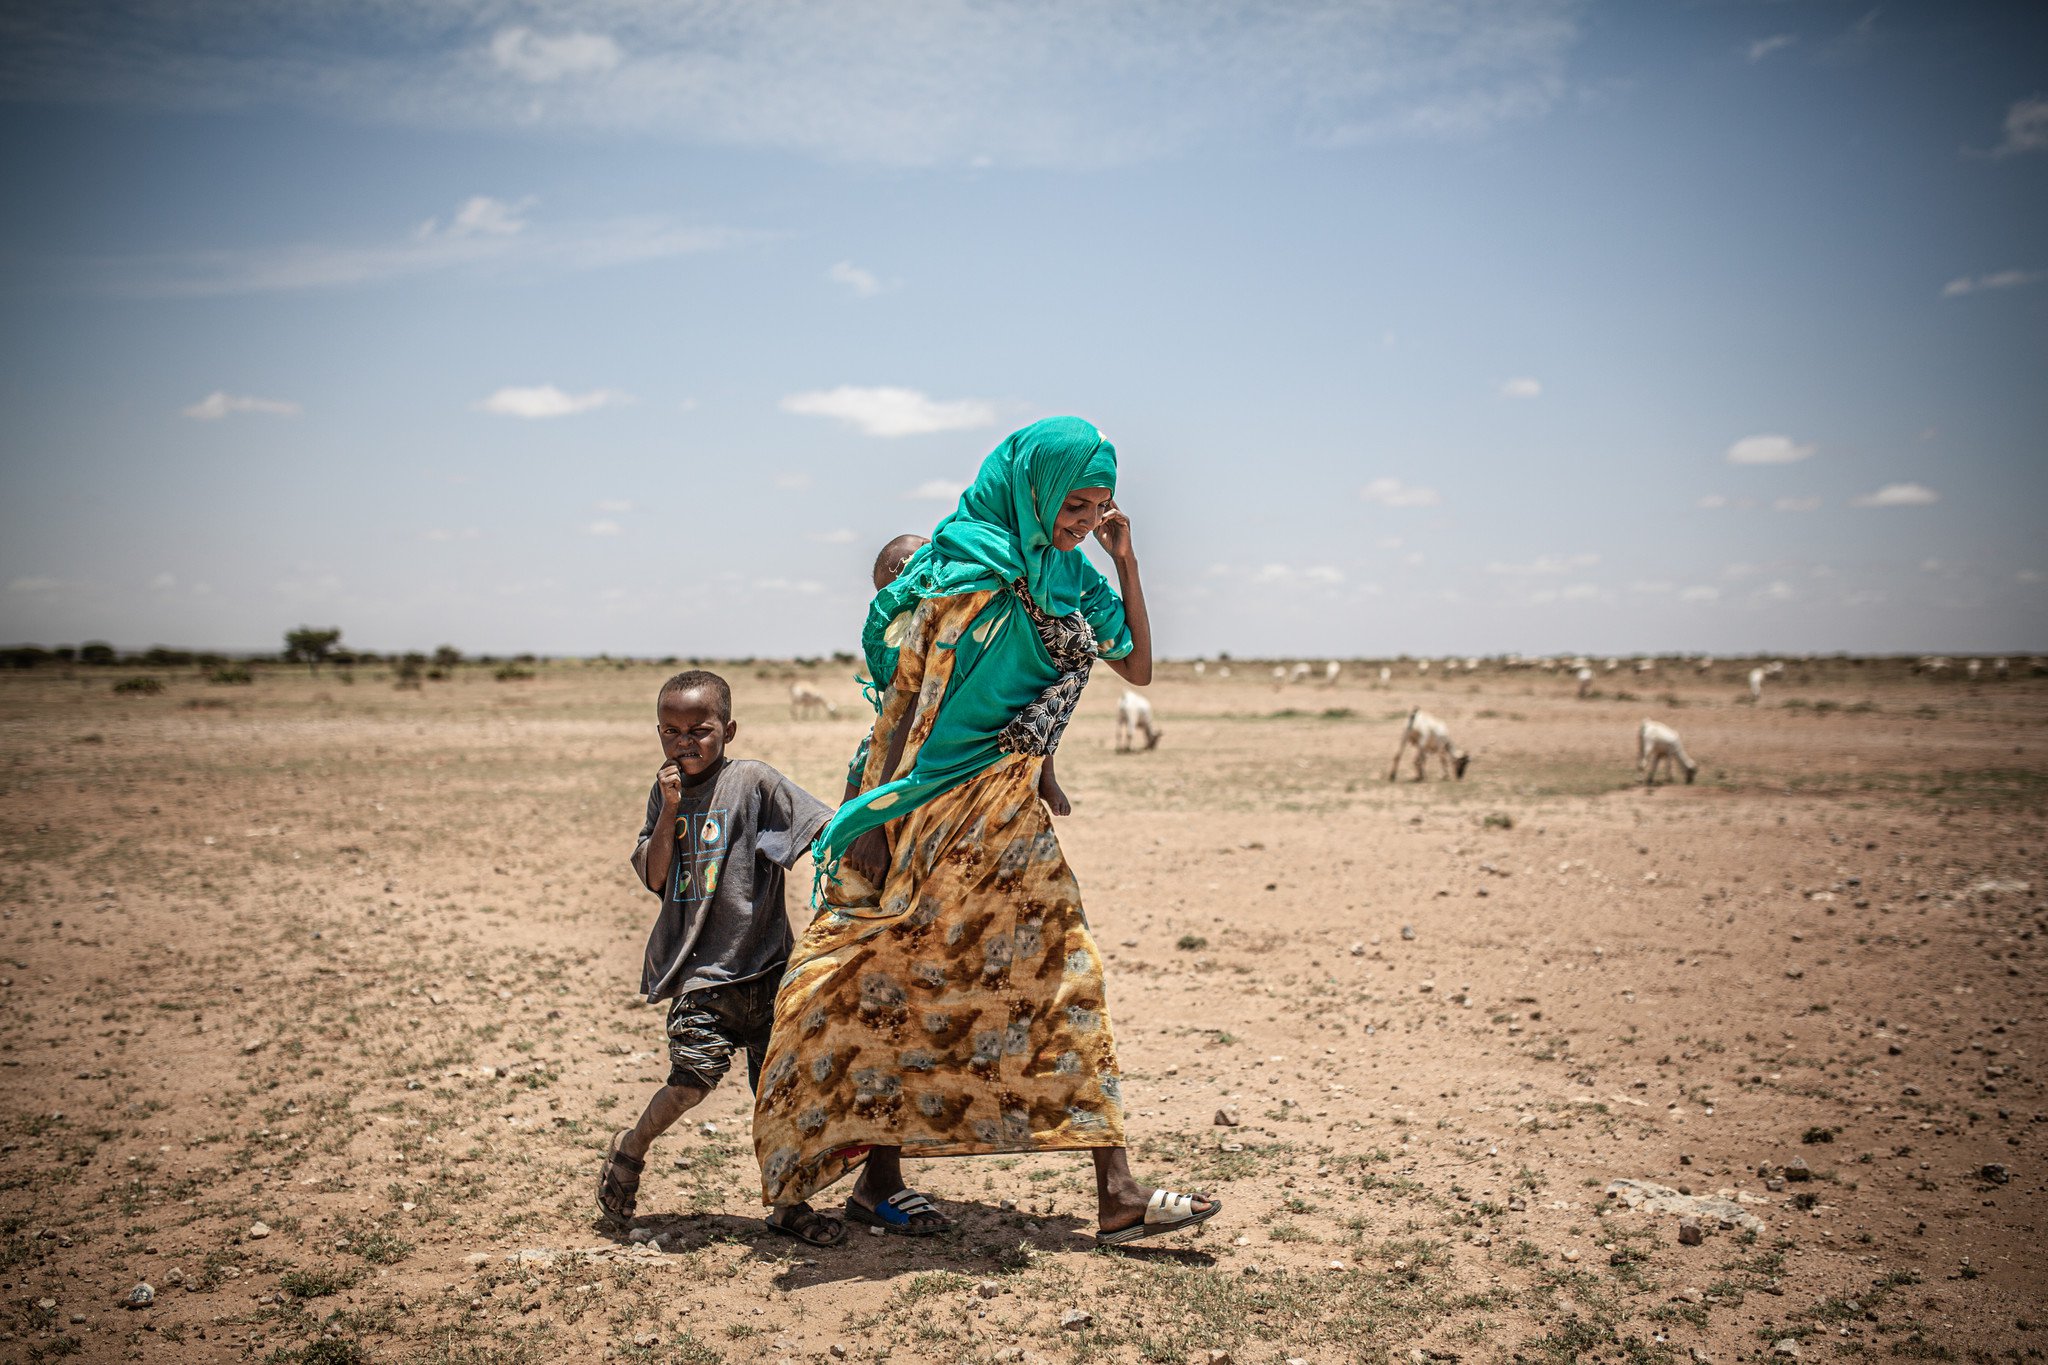 Climate change driving drought crisis in Horn of Africa - Oxfam America